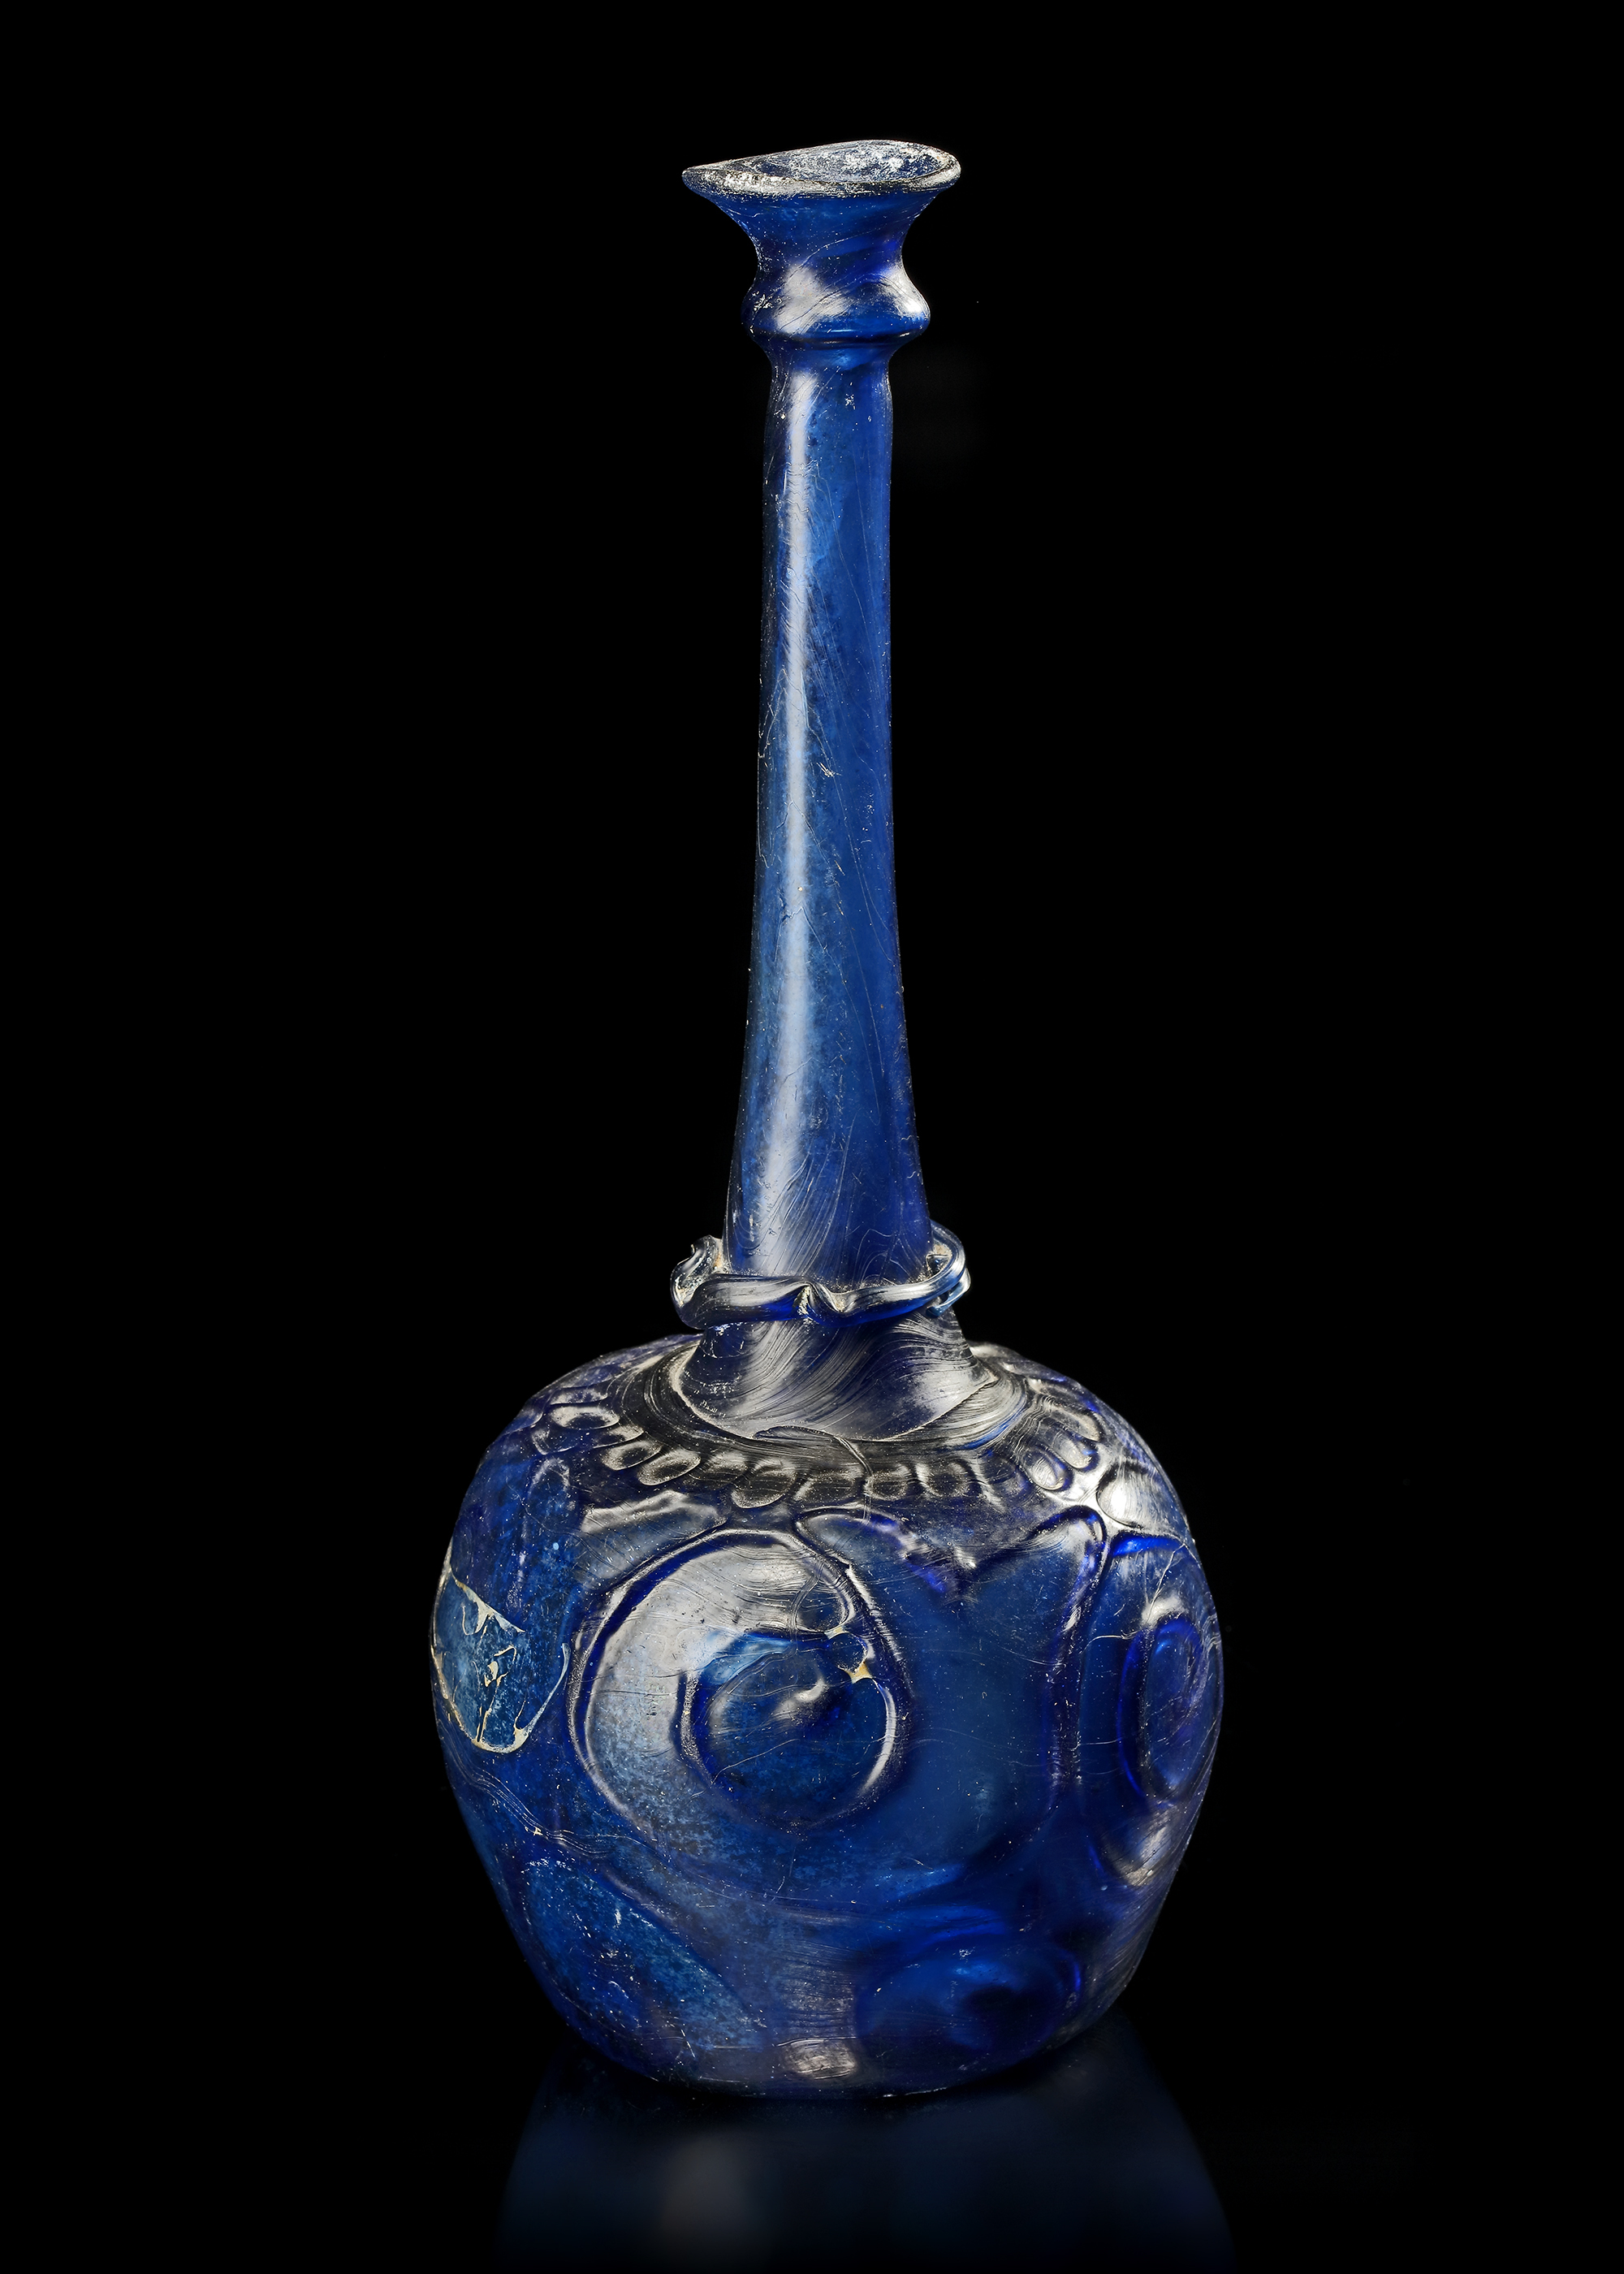 A LARGE MOULD-BLOWN BLUE GLASS BOTTLE-VASE OR SPRINKLER, PERSIA, 12TH CENTURY - Image 10 of 14